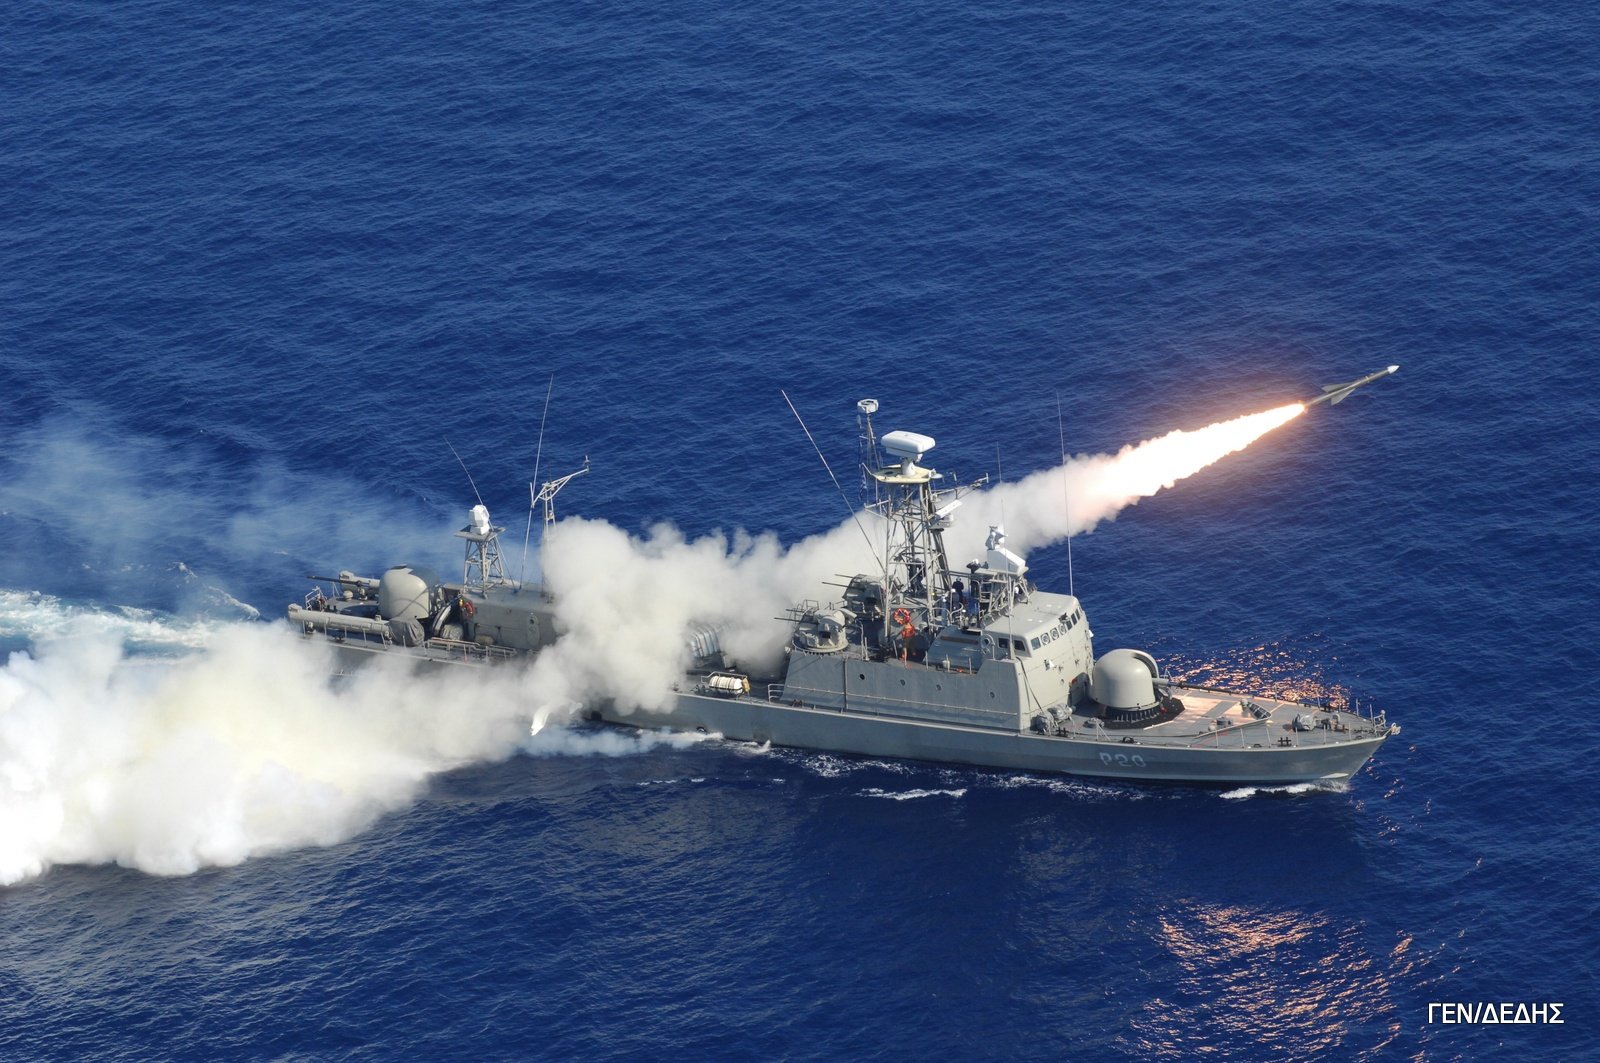 The Hellenic Navy are planning to upgrade Greece's maritime capabilities.